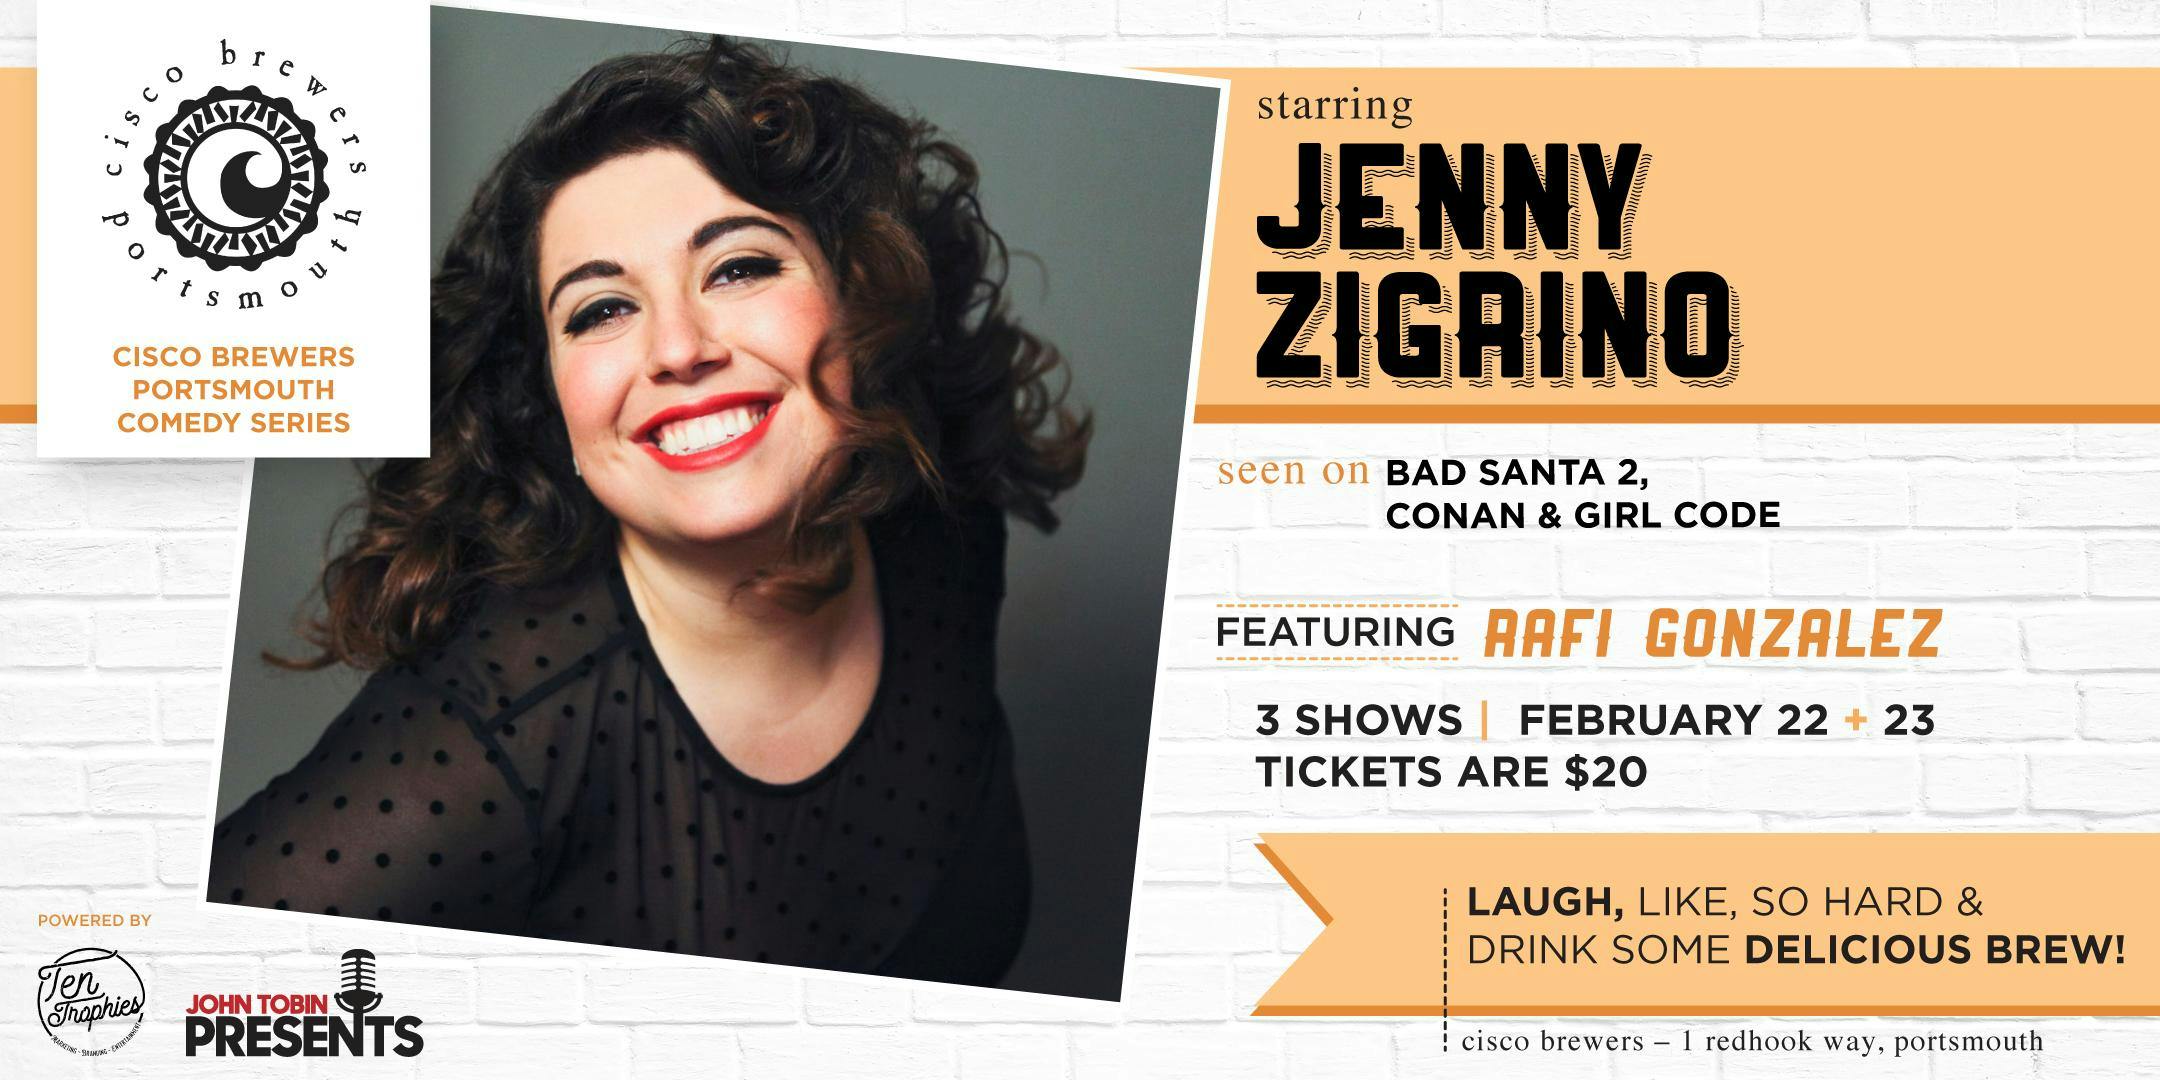 Cisco Brewers Portsmouth Comedy Series Starring Jenny Zigrino